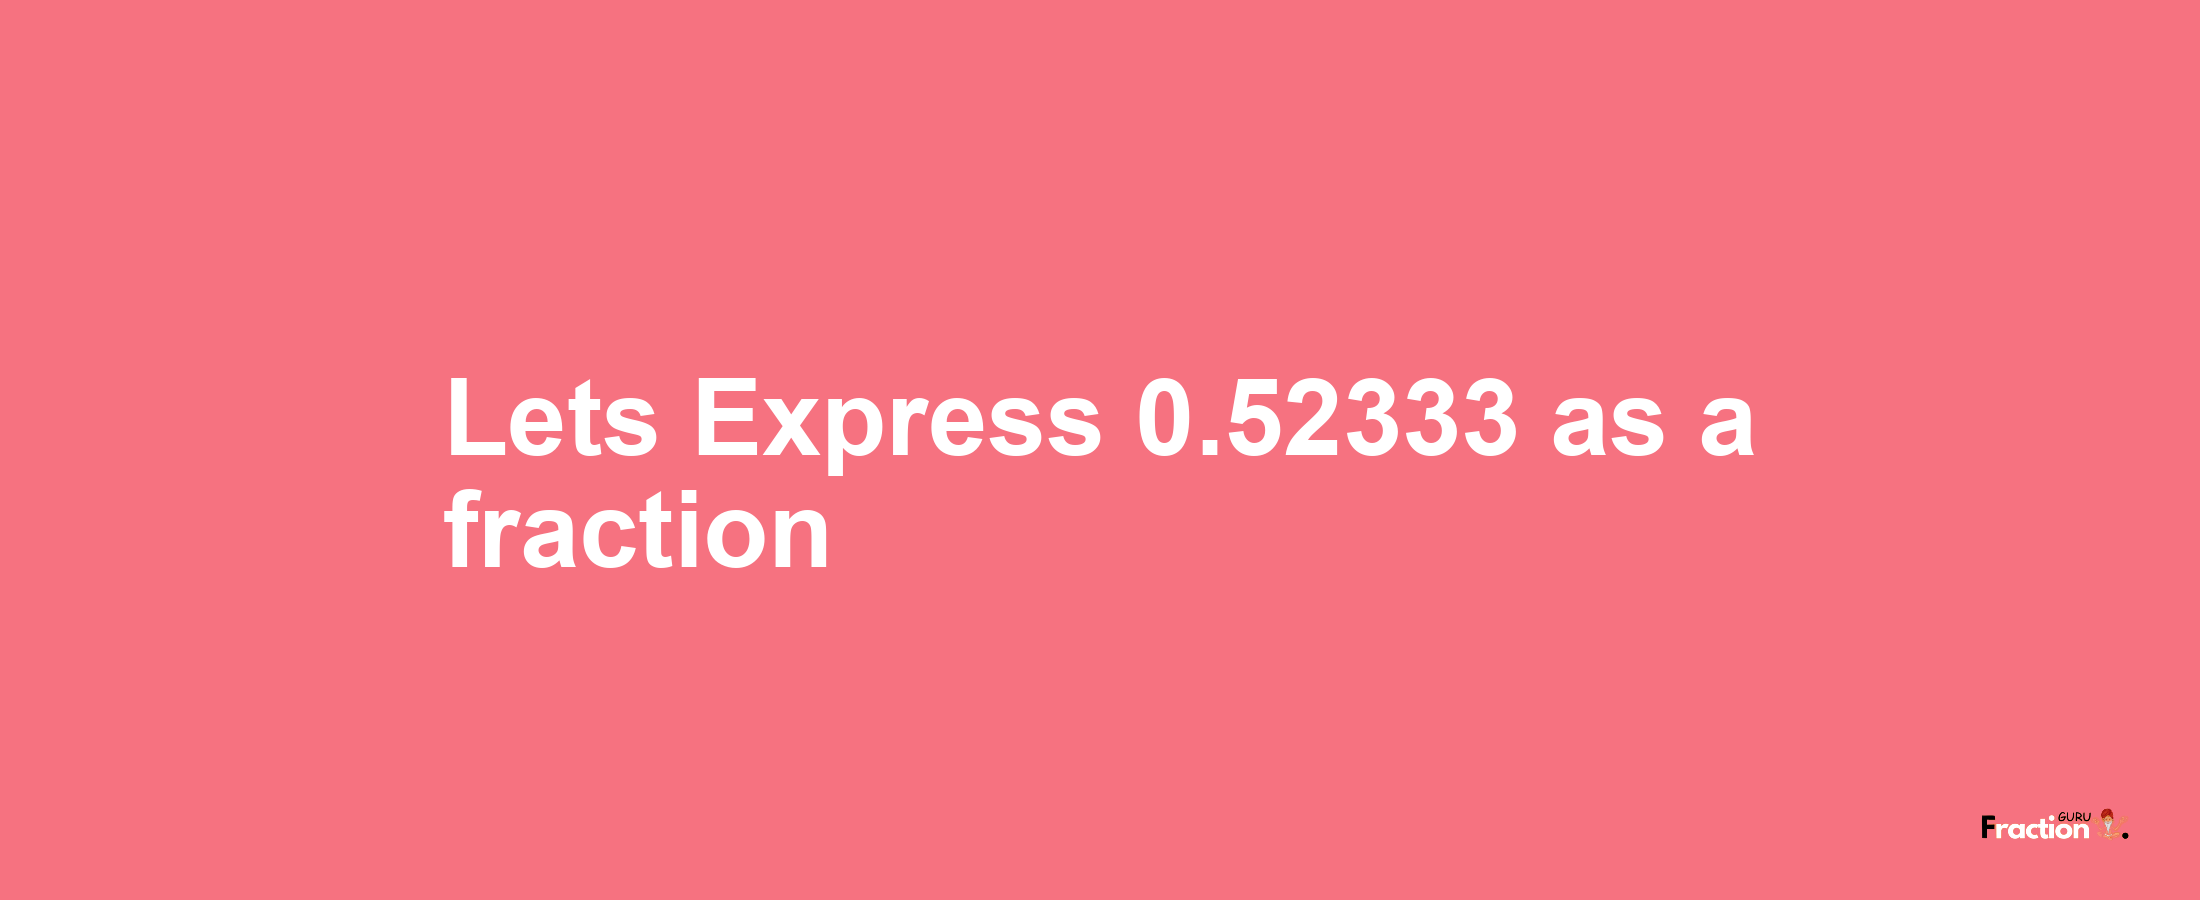 Lets Express 0.52333 as afraction